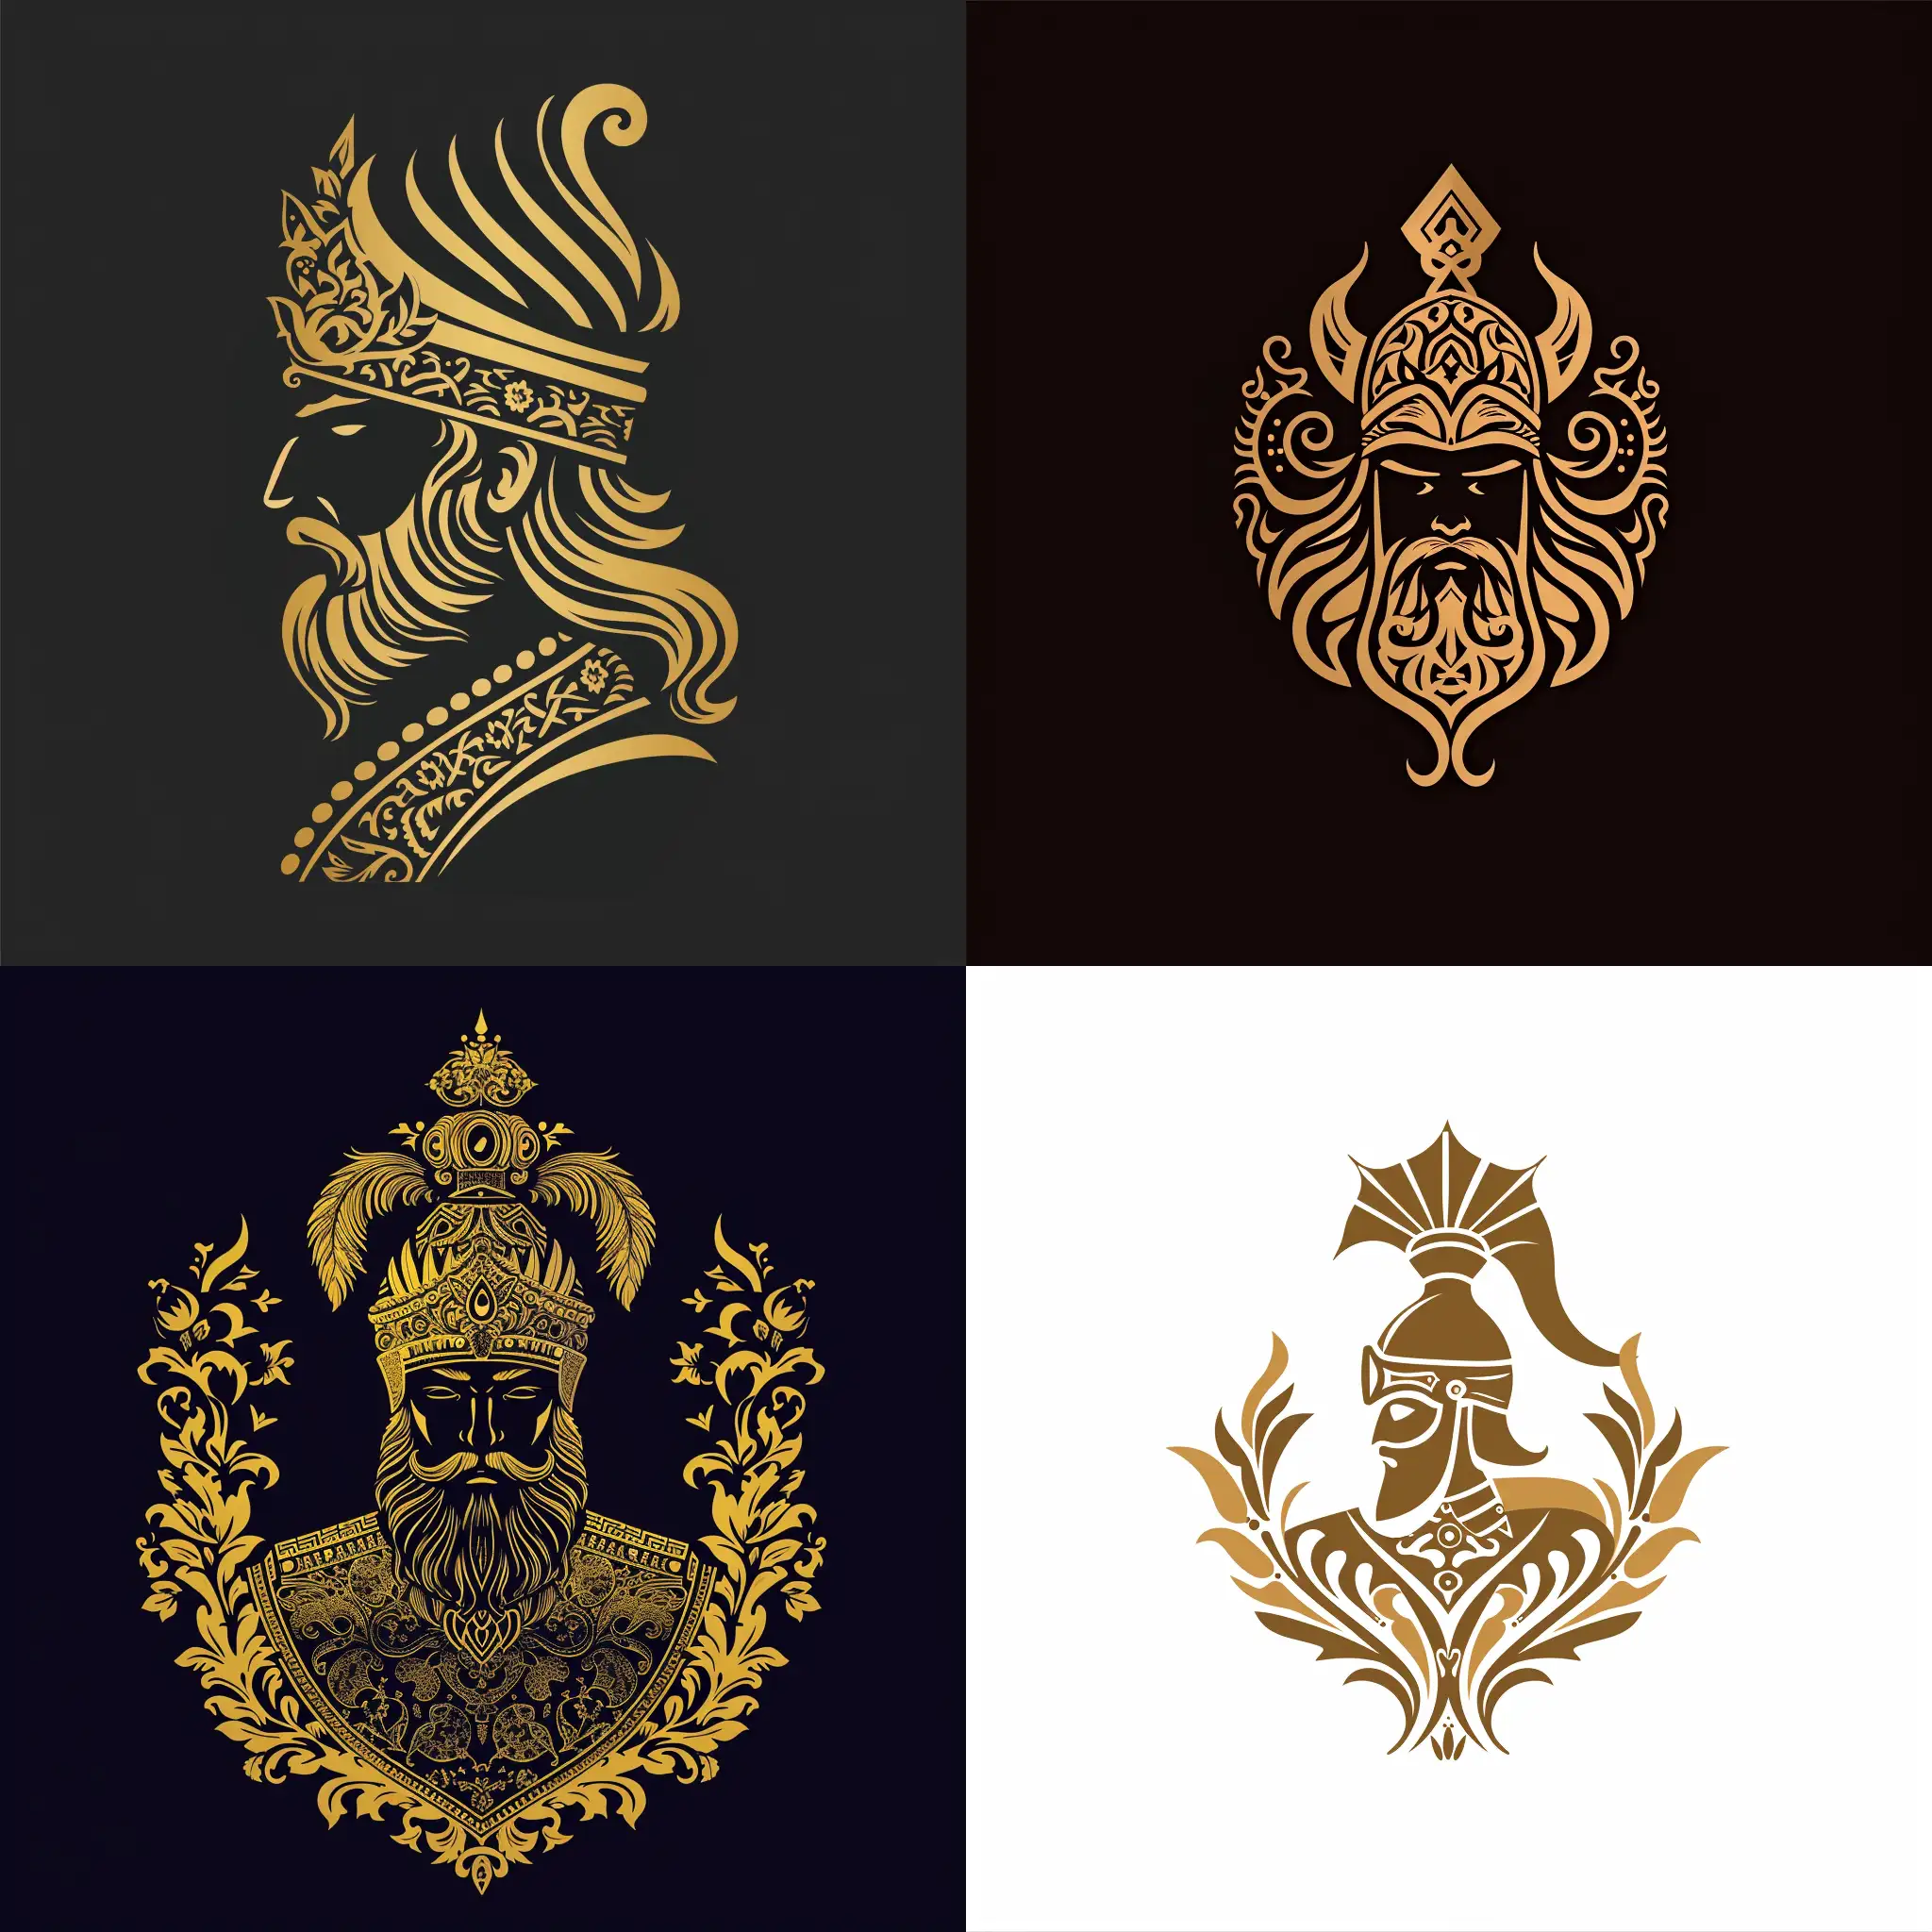 imagine an image of  luxurious embelms style logo inspired of persian warrior for traditional persian icecream. logo design style